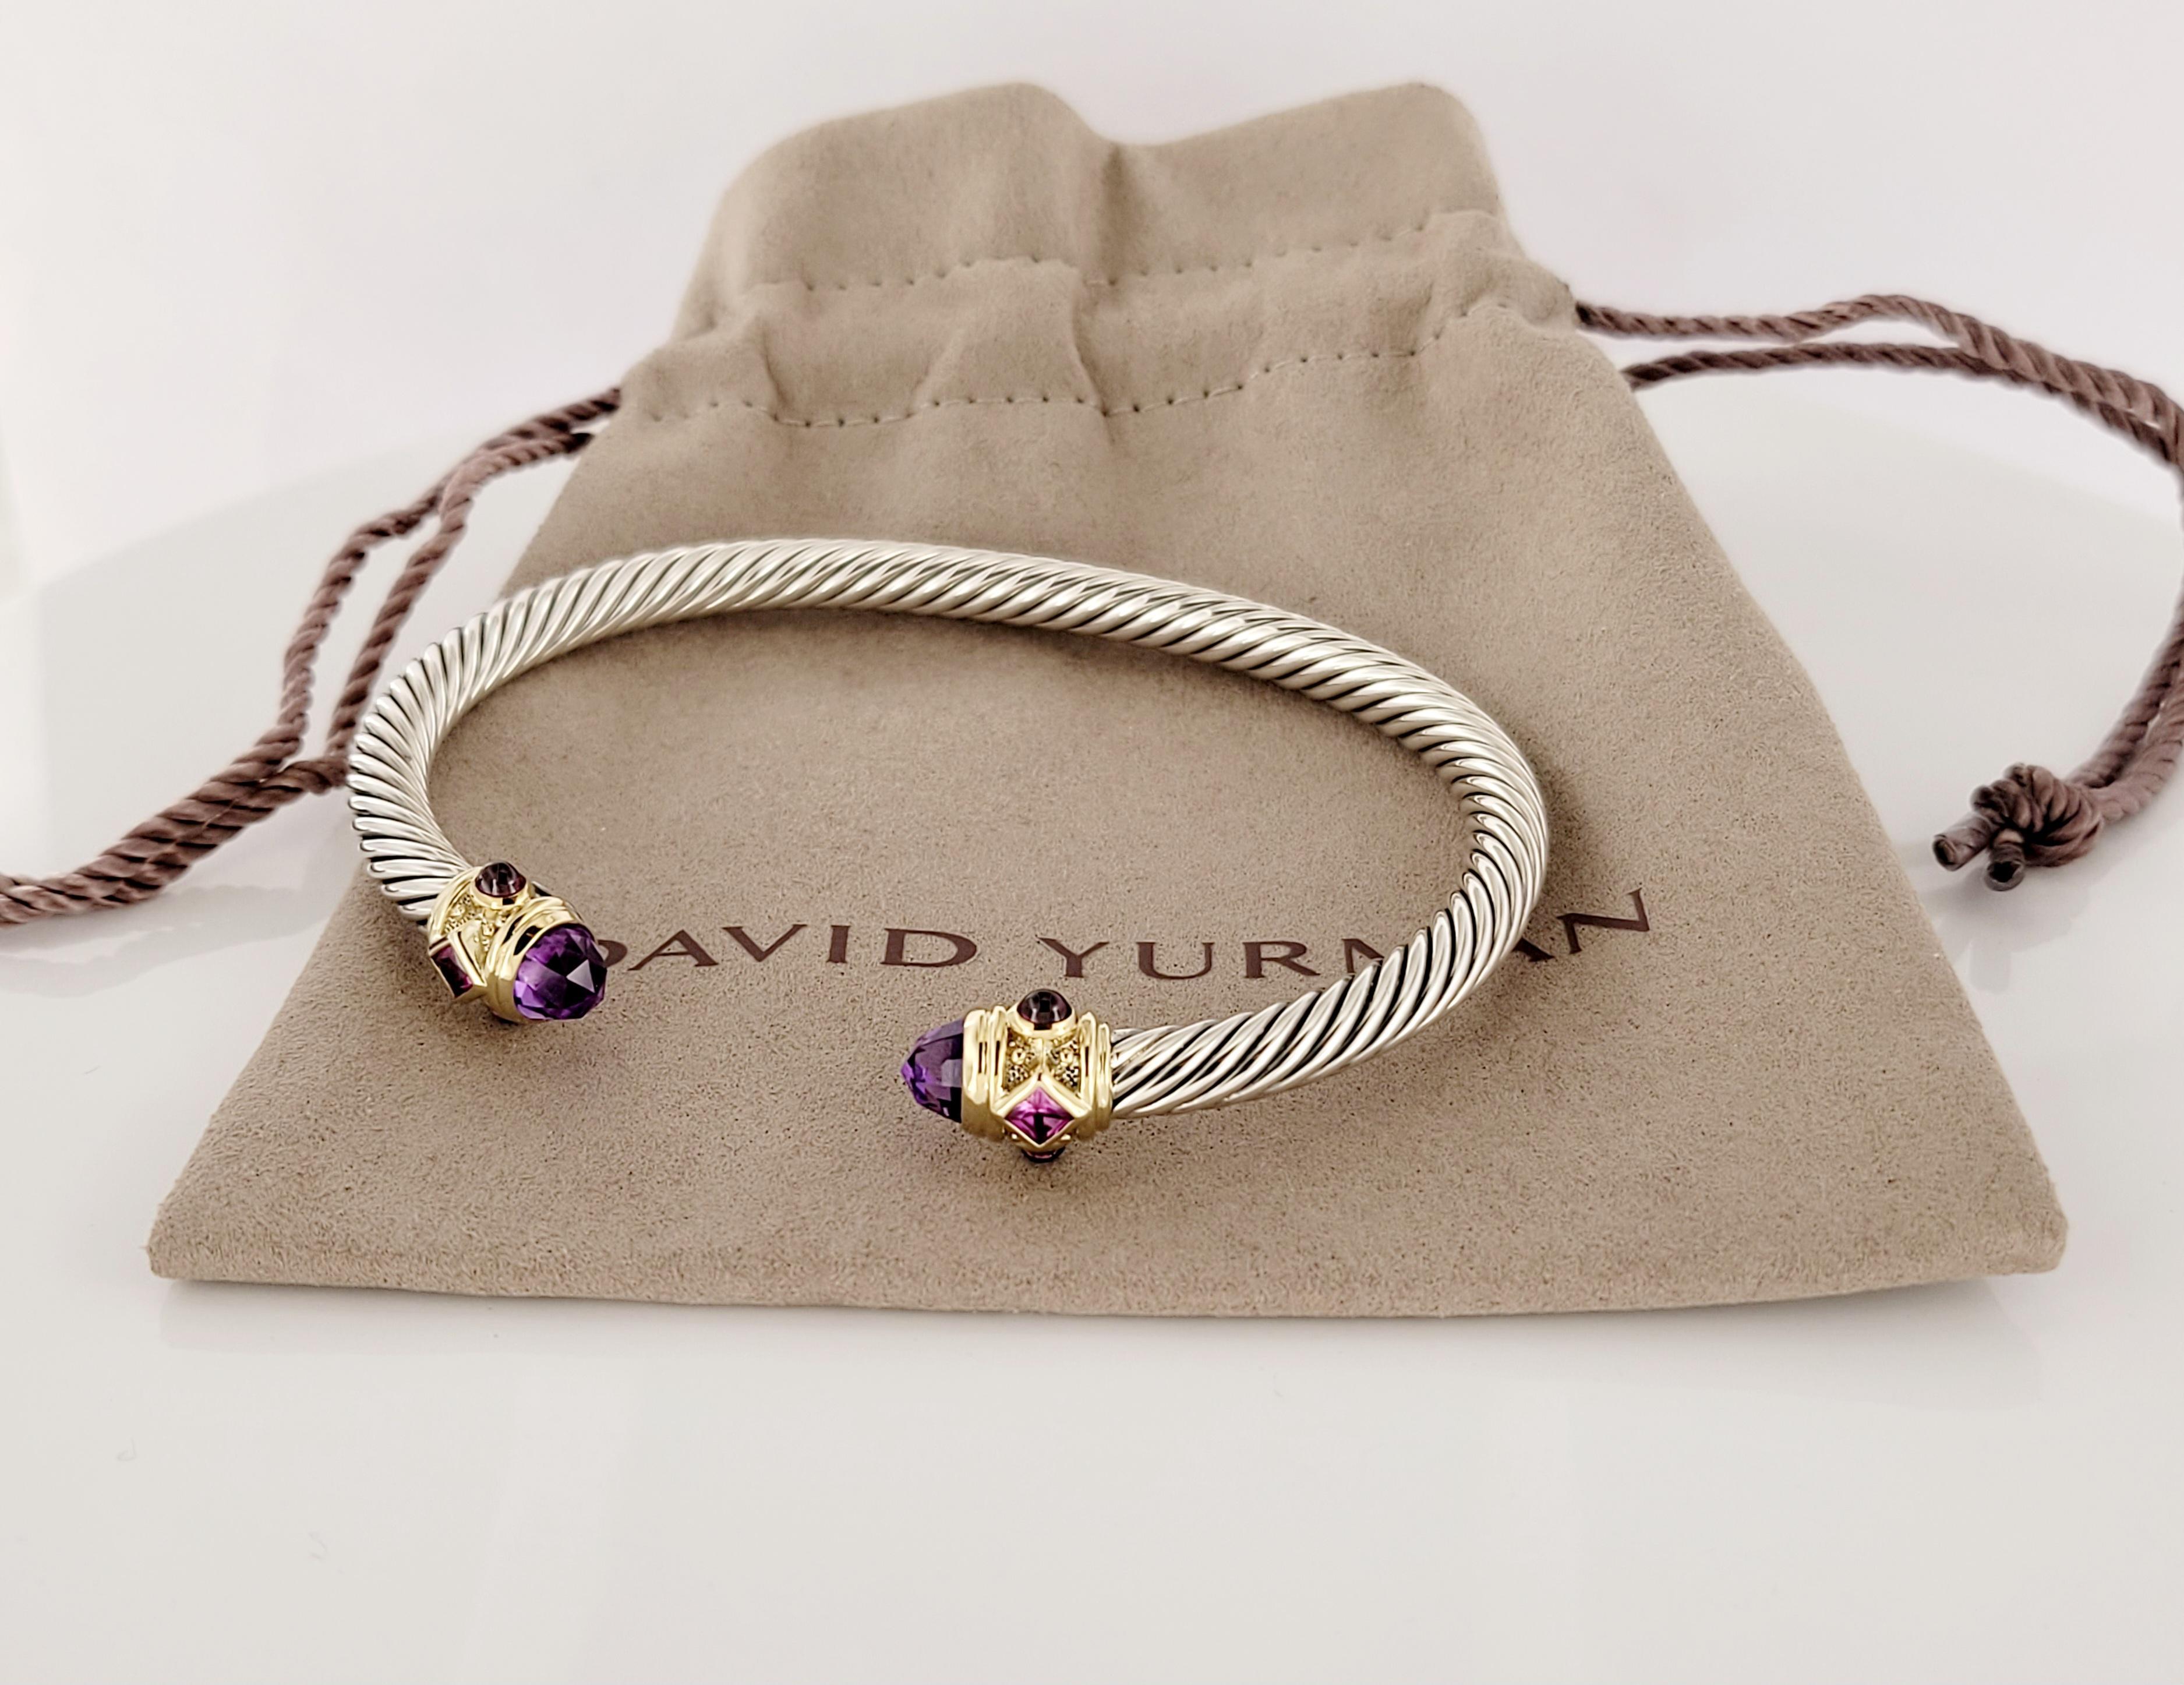 Renaissance Cable Bracelet
Sterling Silver & 14K Yellow Gold
Amethyst Pink Tourmaline and rhodonite  garnet
Bracelet 5mm
Weight 29.2gr  
Condition Never worn
Comes with David Yurman pouch